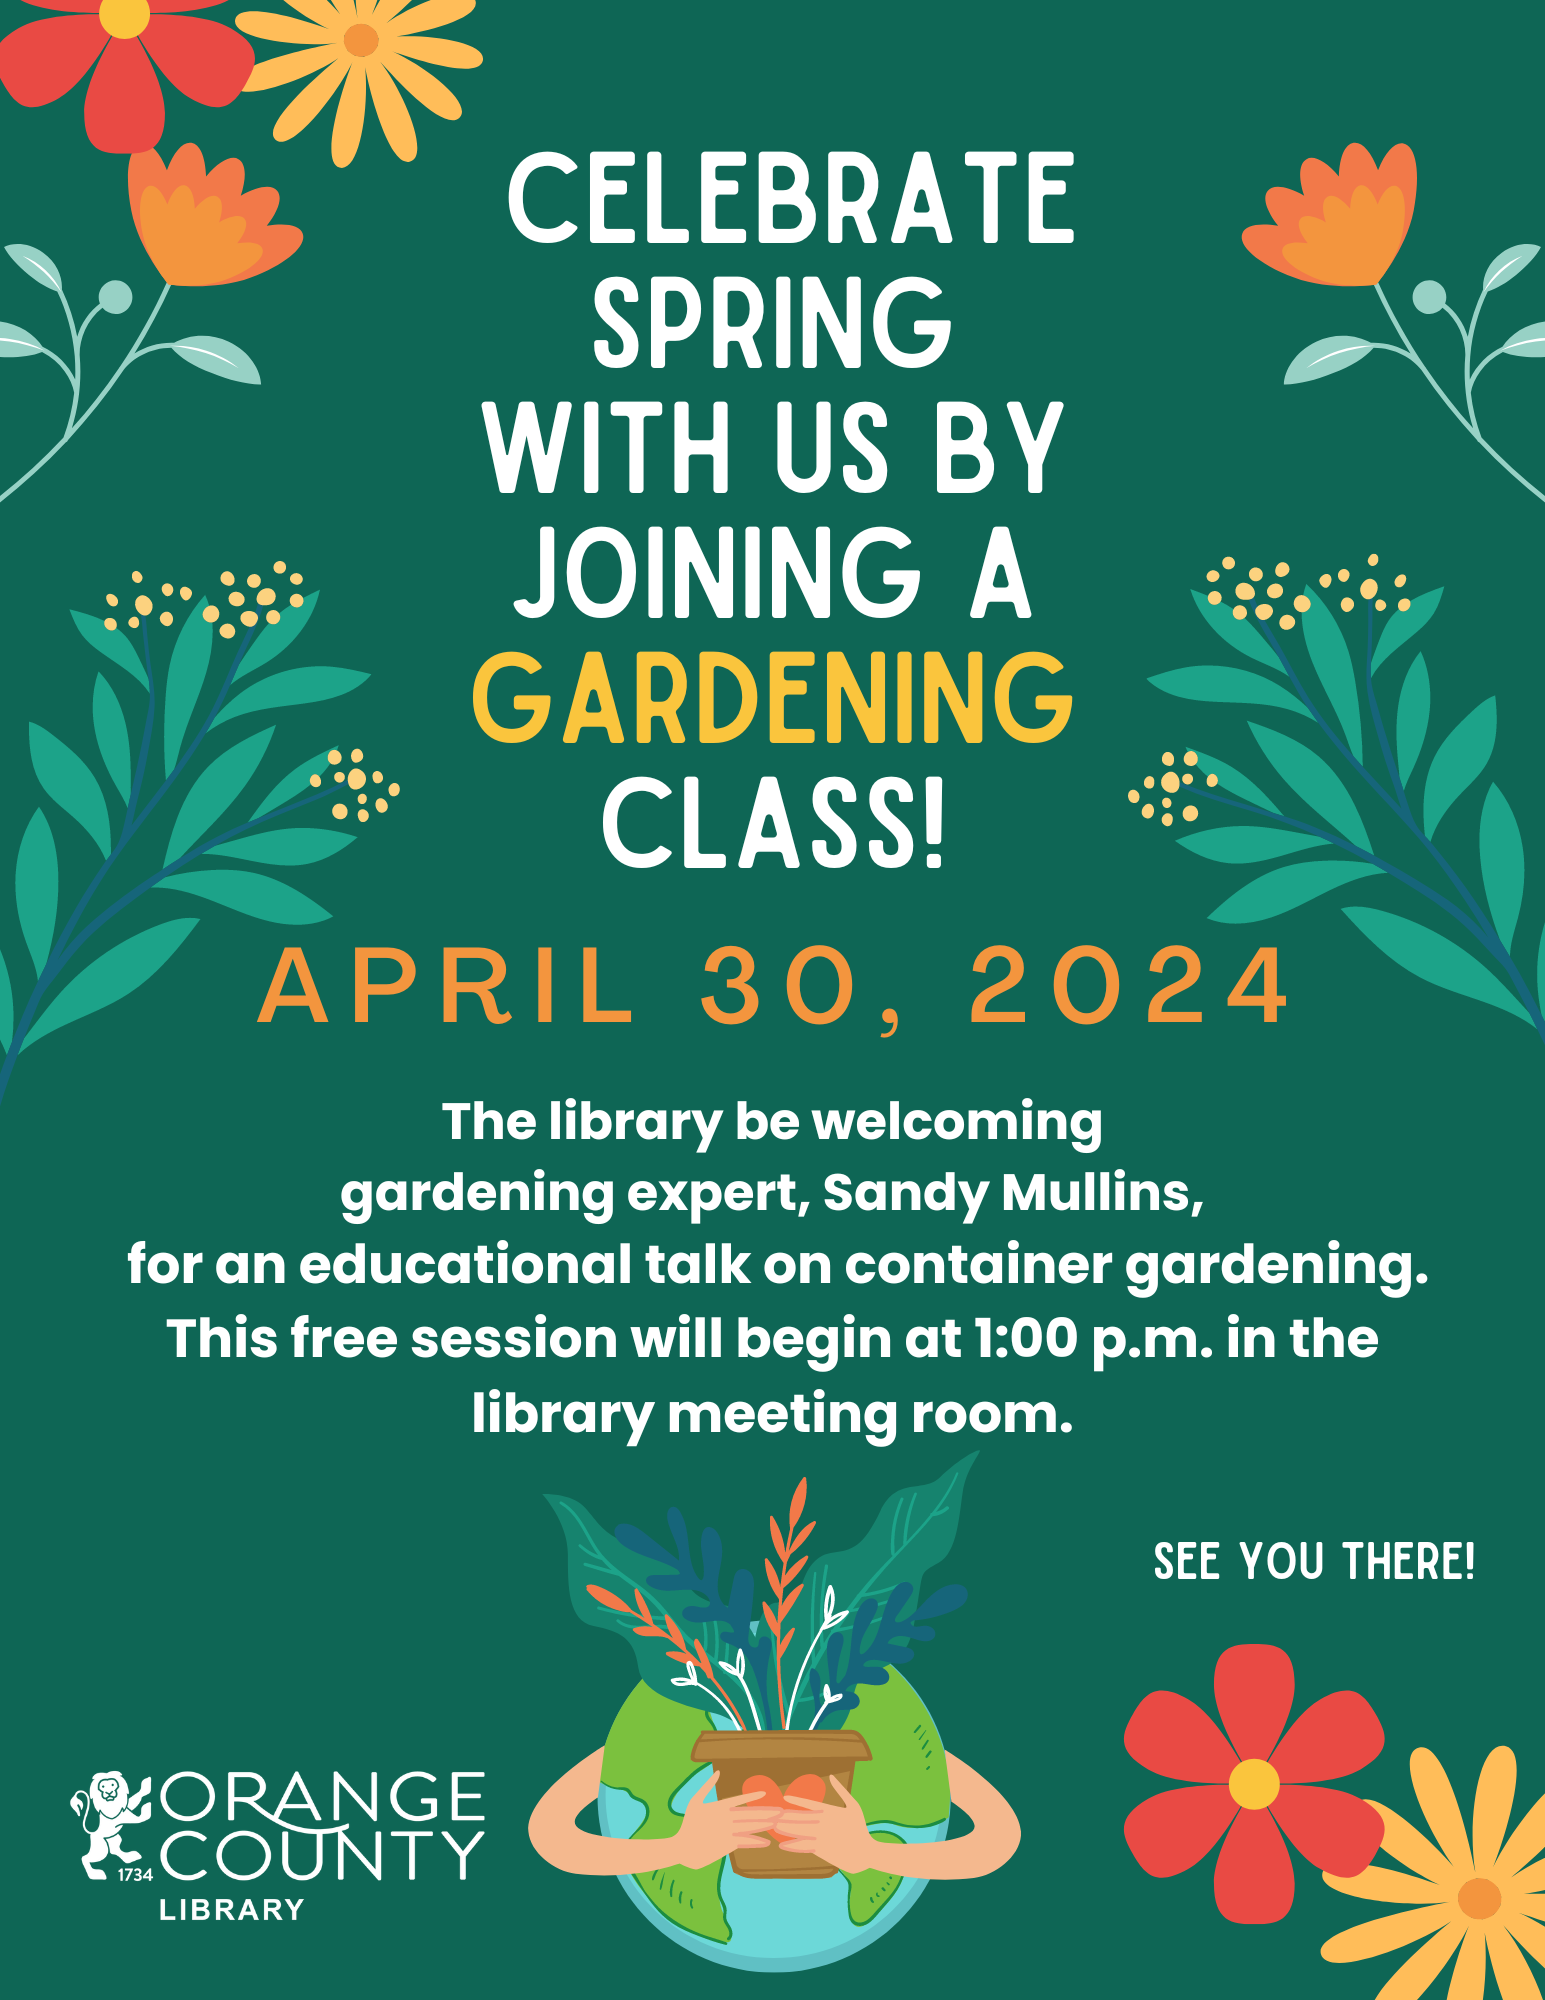 Celebrate Spring by joining us for a gardening class on April 30, 2024 The library be welcoming gardening expert, Sandy Mullins, for an educational talk on container gardening. This free session will begin at 1:00 p.m. in the Gordonsville library meeting room. See you there! Orange County Public Library logo image.